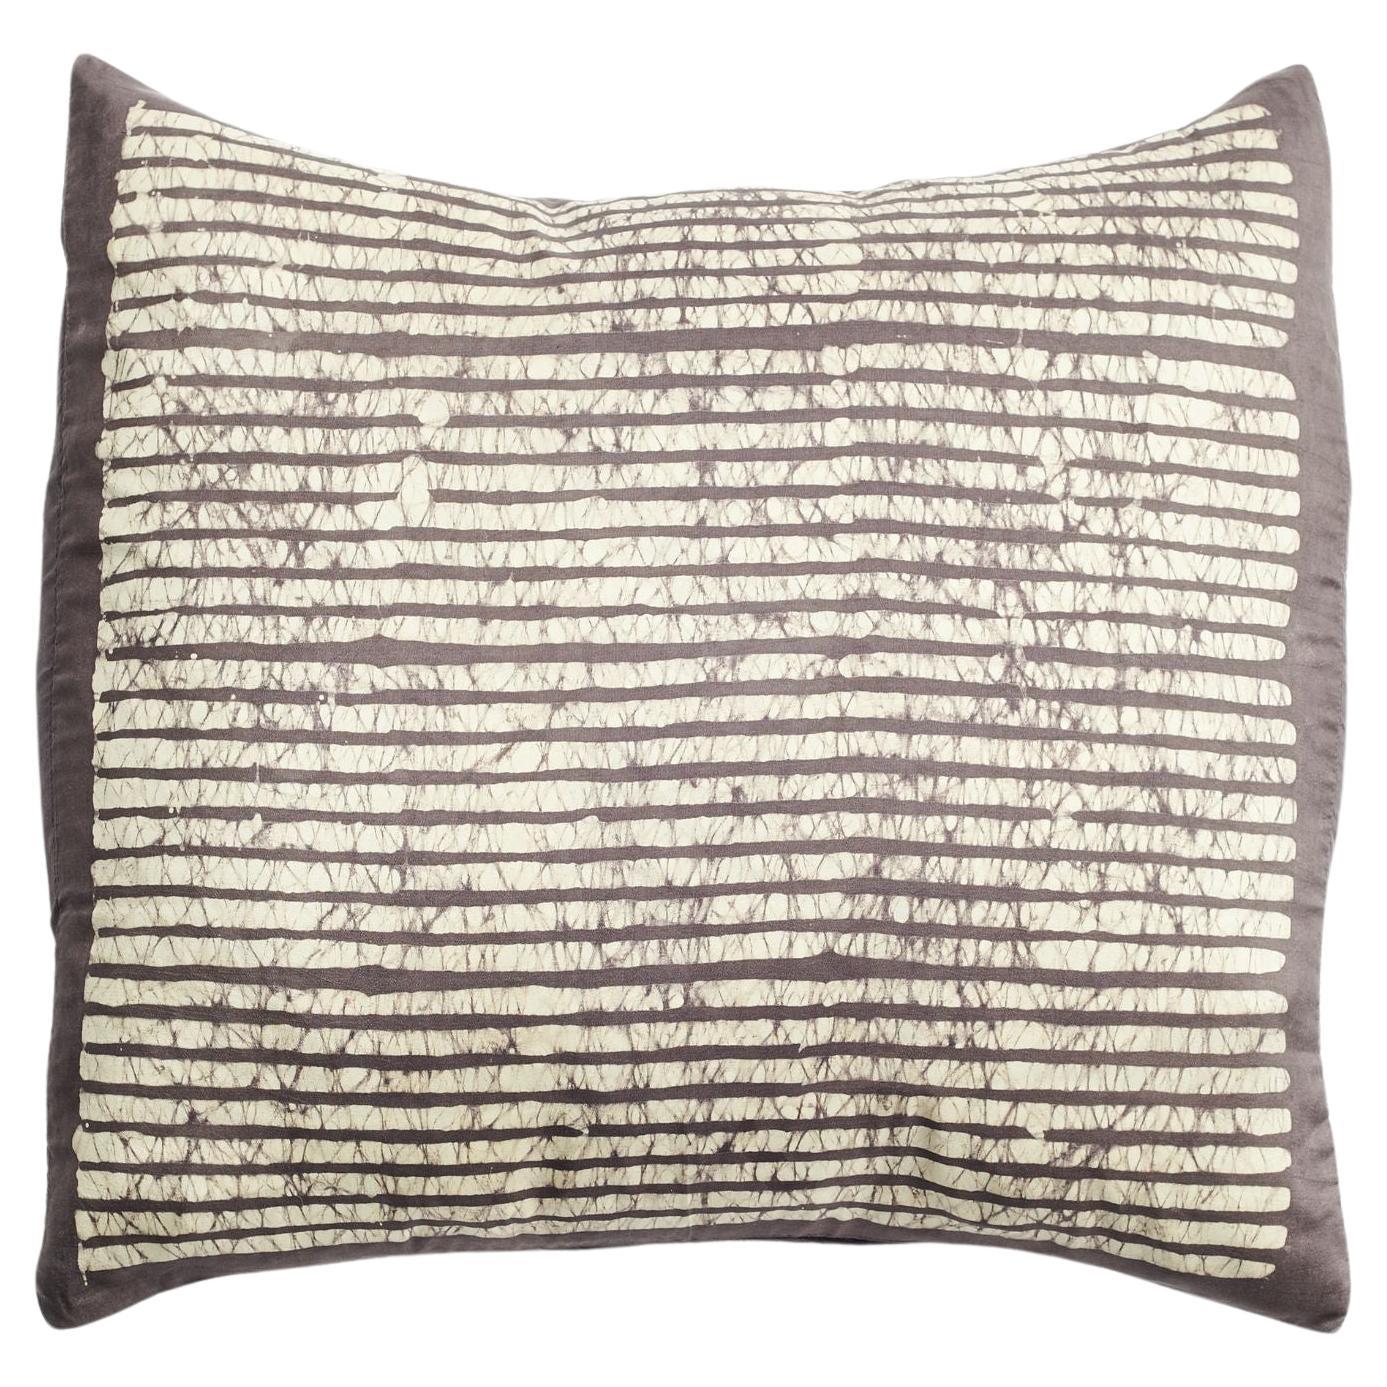 Maple Black Silk Pillow In Stripes Motifs Handcrafted By Artisans 